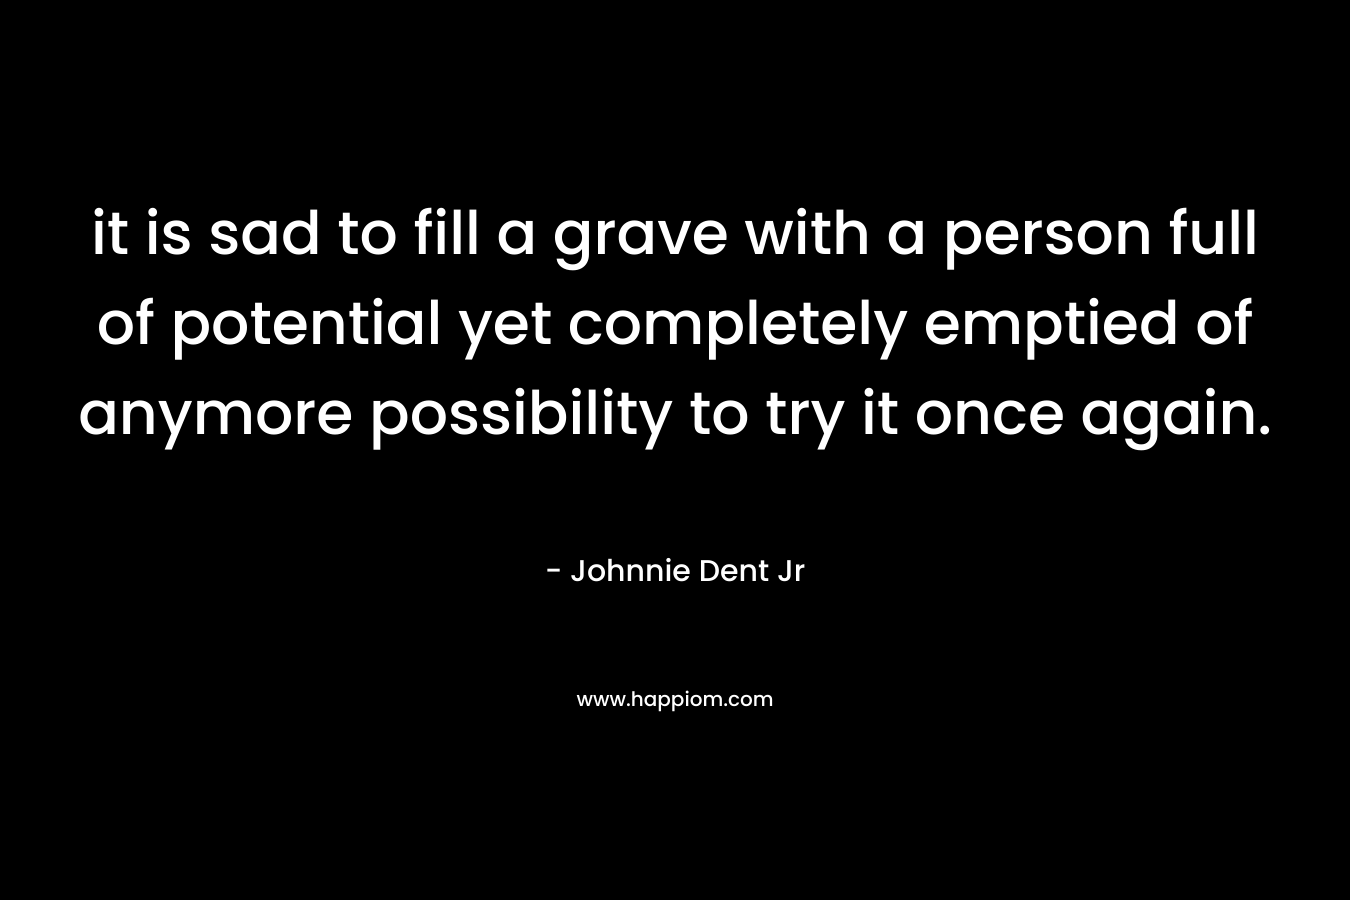 it is sad to fill a grave with a person full of potential yet completely emptied of anymore possibility to try it once again. – Johnnie Dent Jr